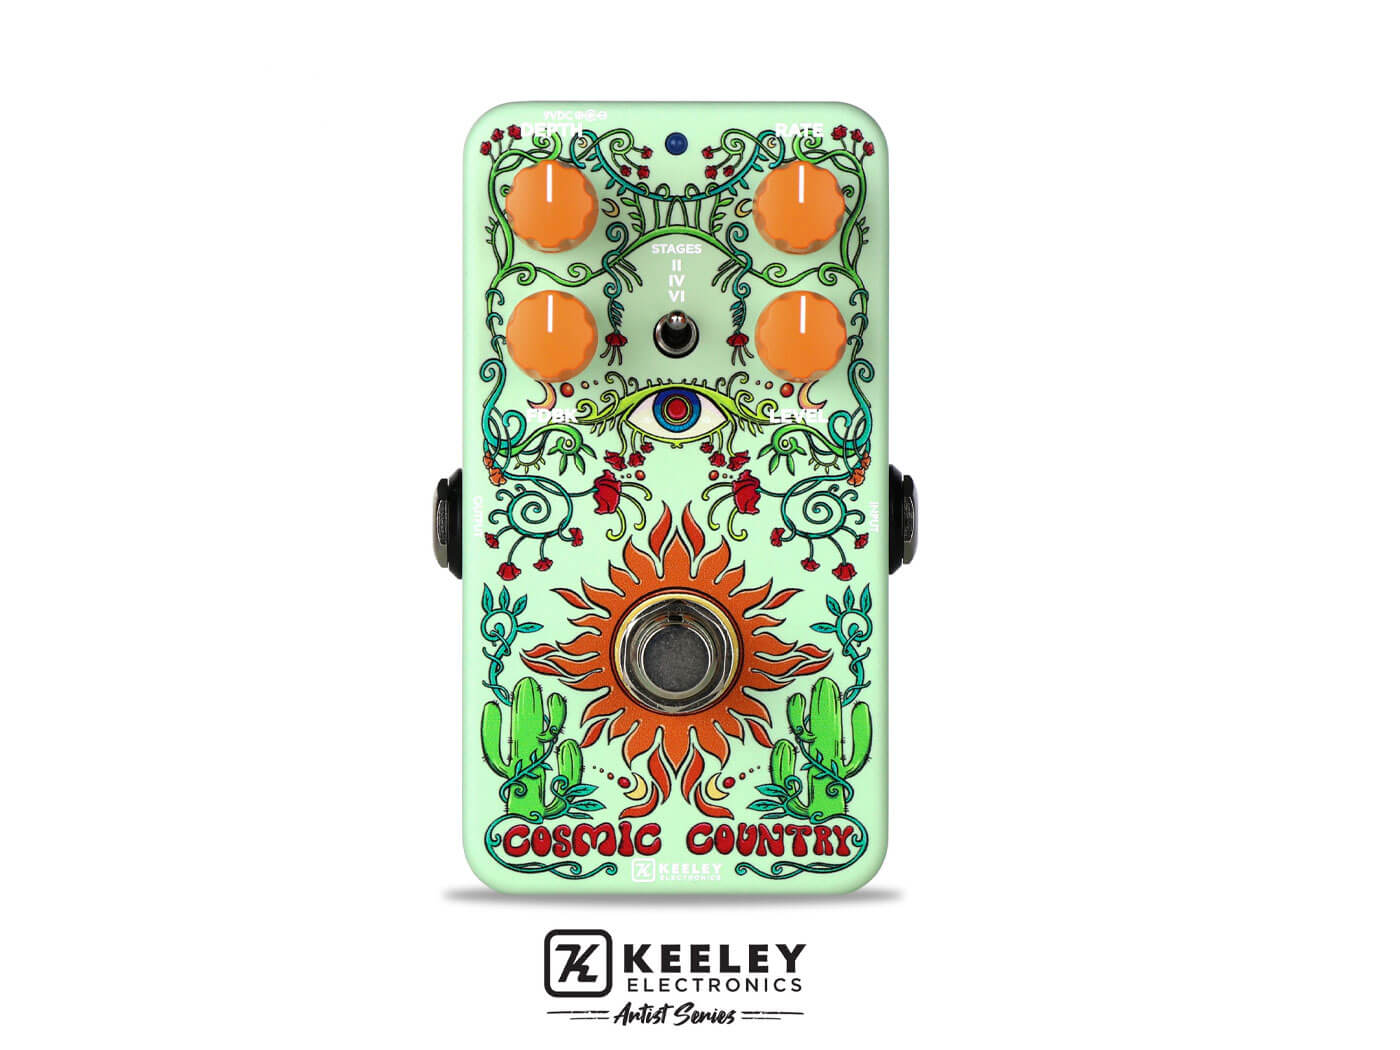 Keeley's Cosmic Country Phaser